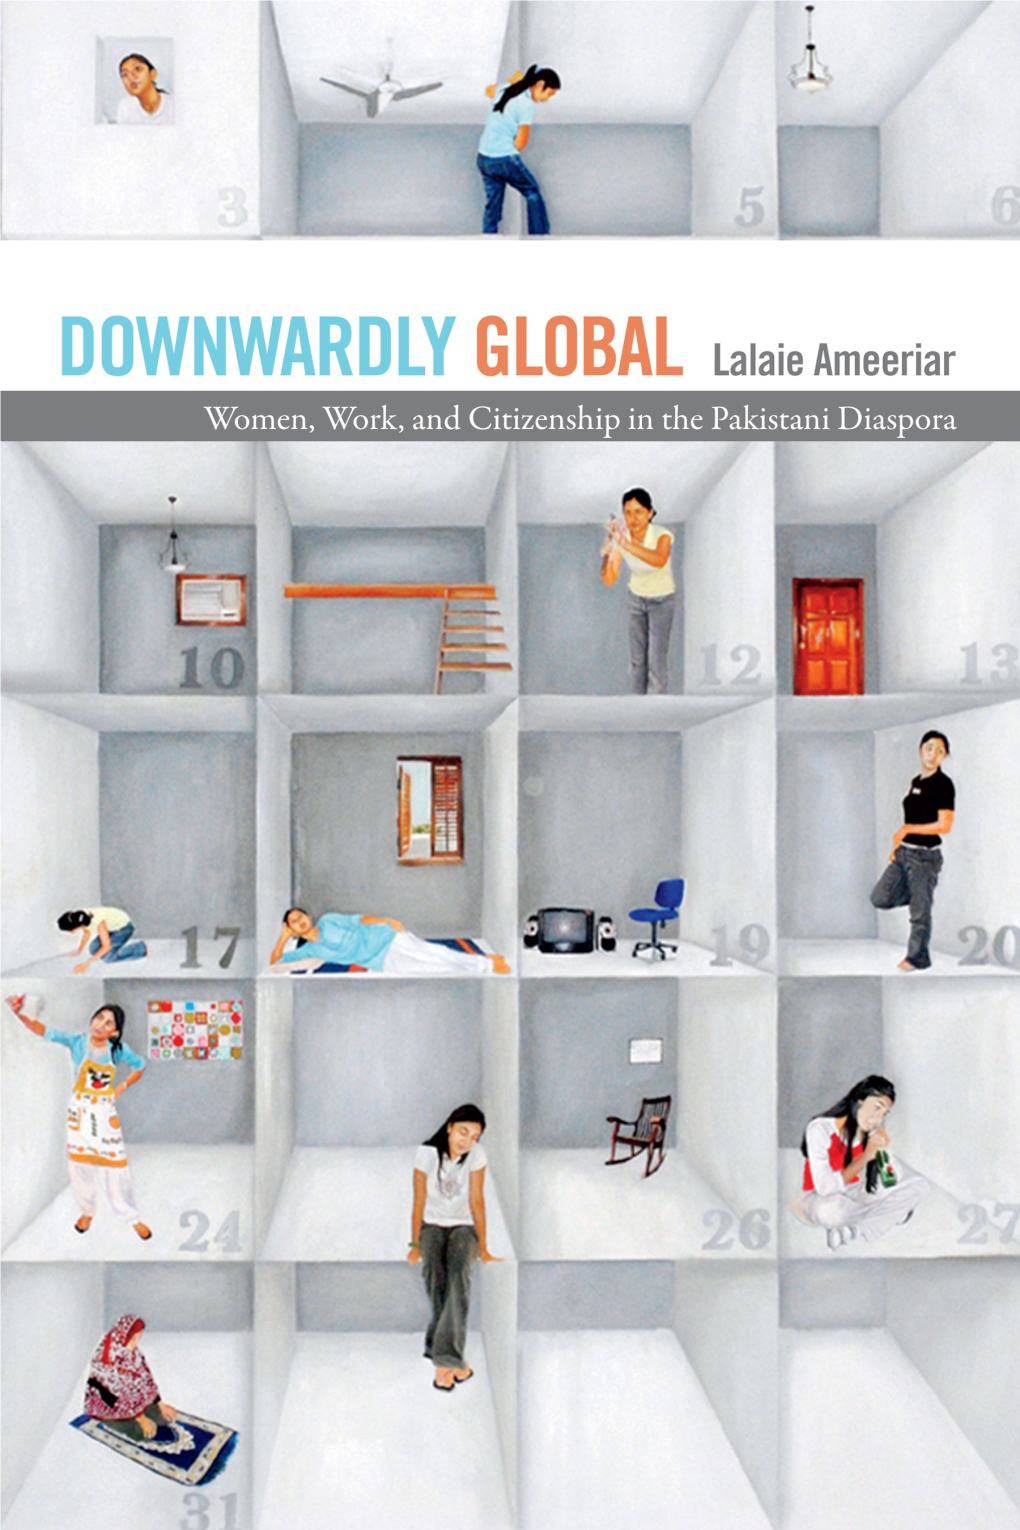 Downwardly Global: Women, Work, and Citizenship in the Pakistani